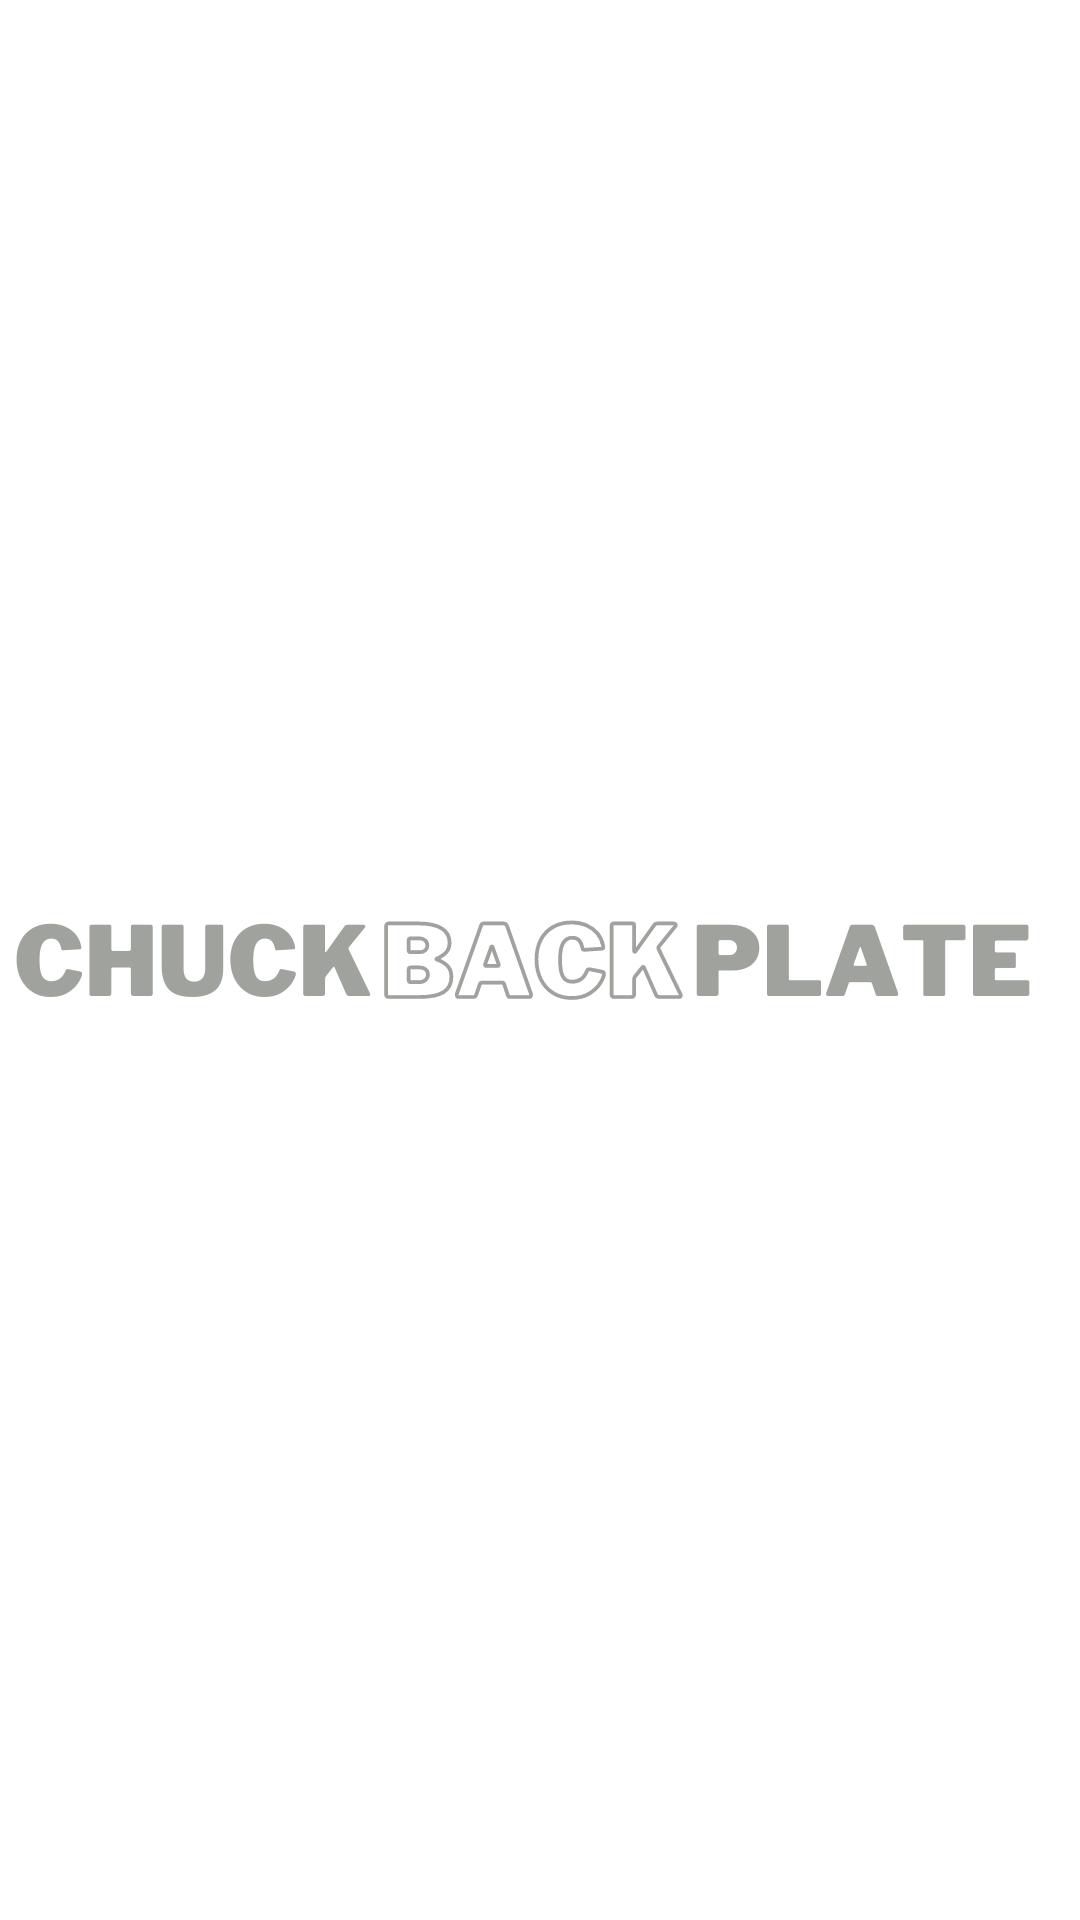 Chuck Back Plate Title